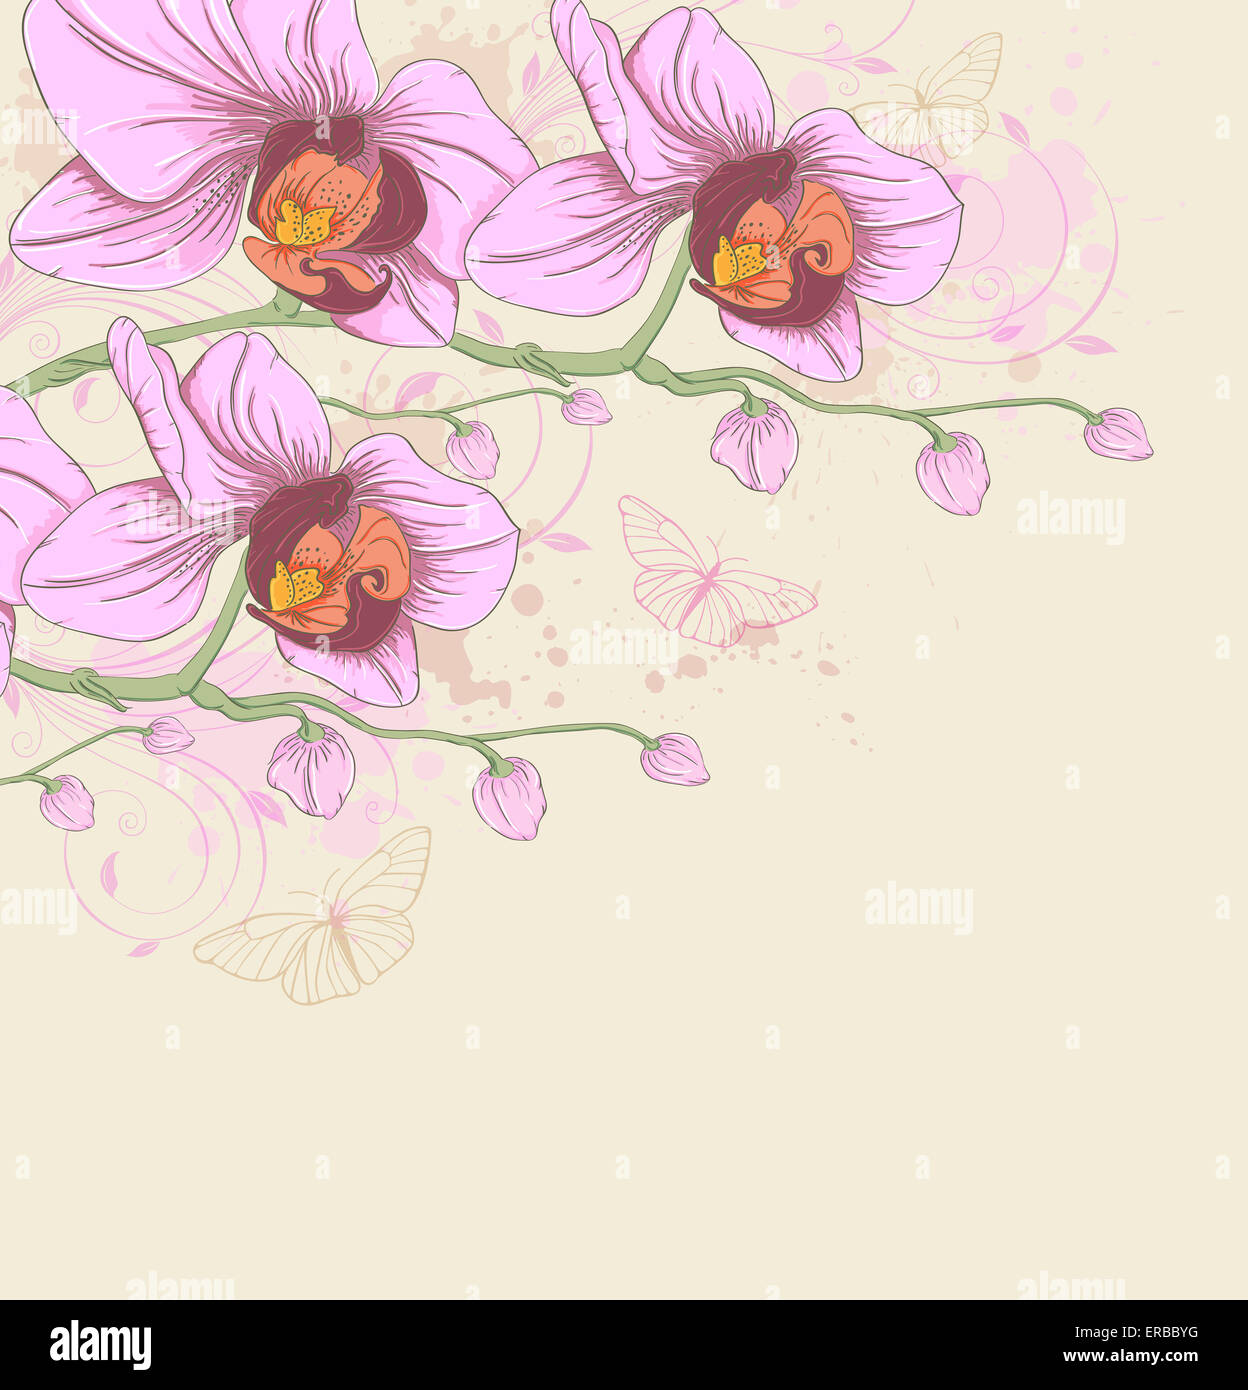 Decorative background with pink orchids and butterflies Stock Photo